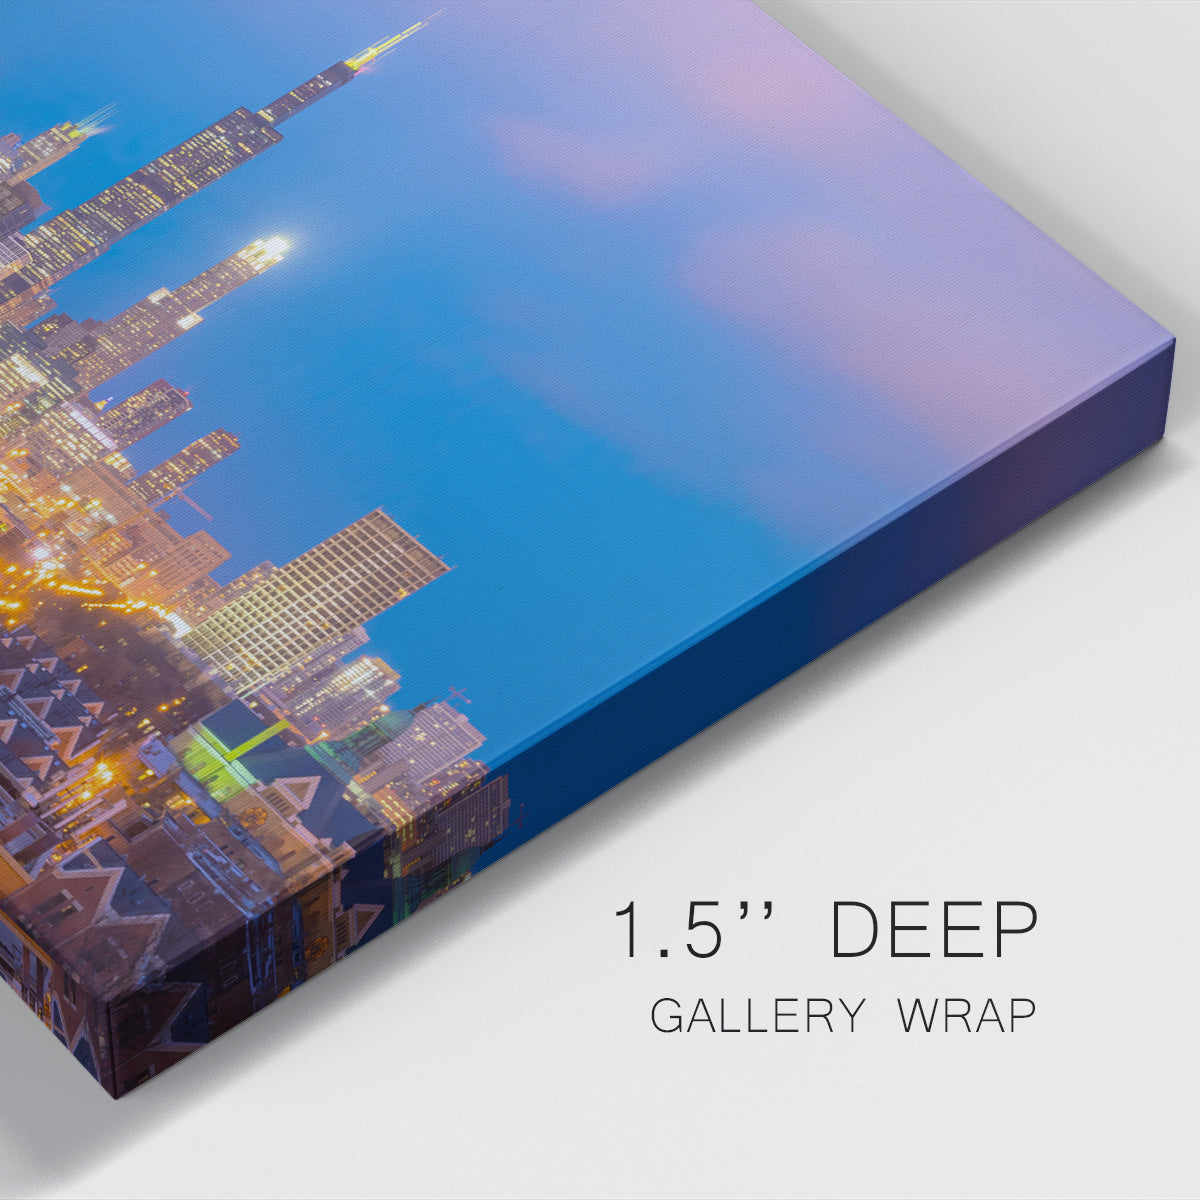 Downtown Chicago Skyline at Sunset - Gallery Wrapped Canvas